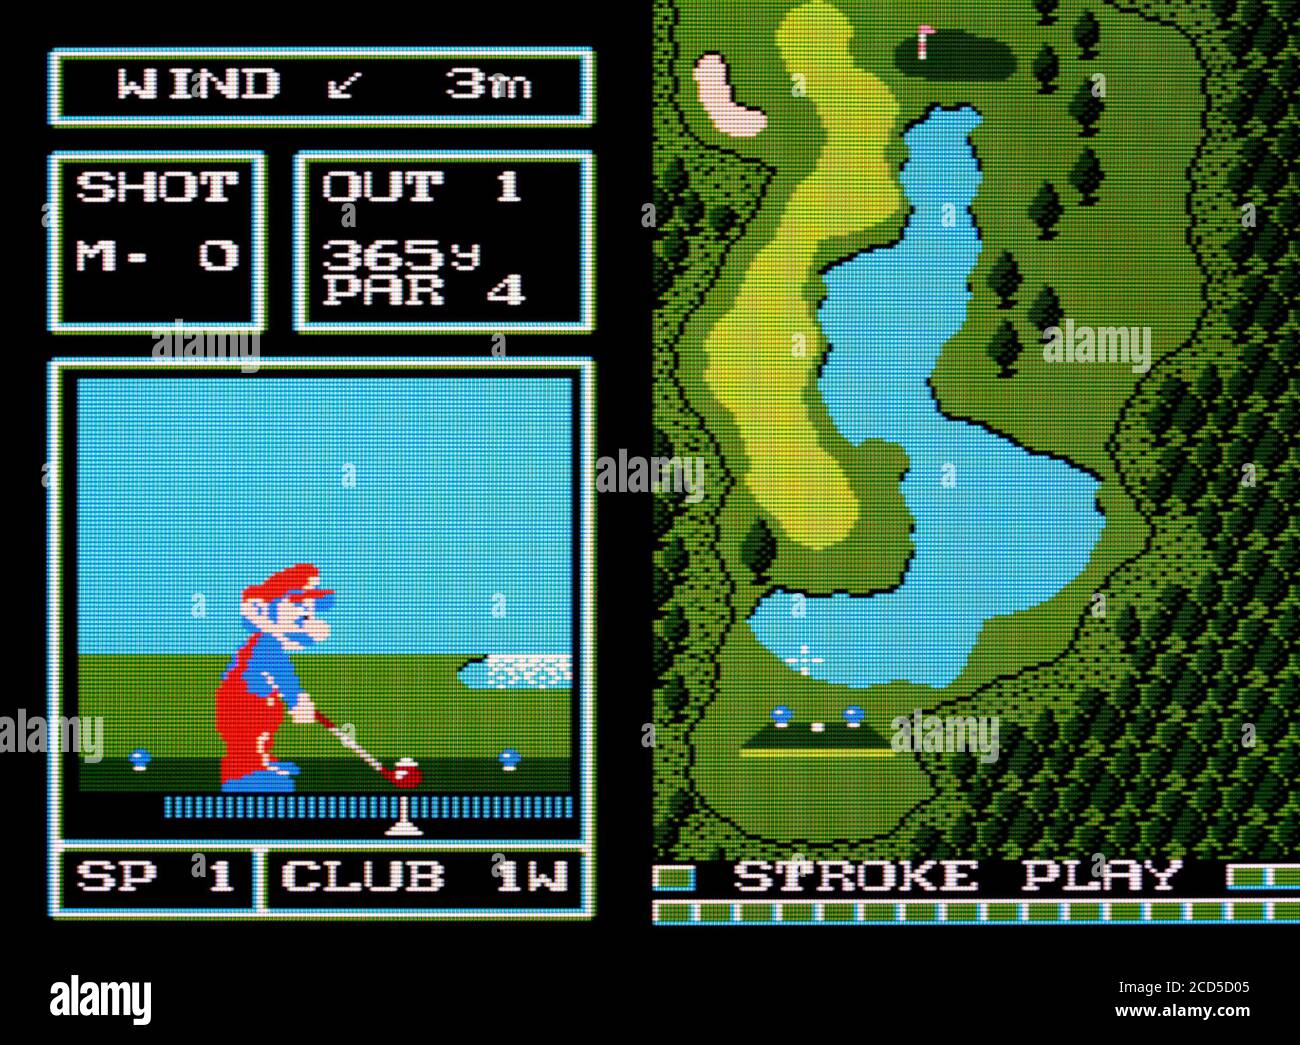 Family Computer Golf Japan Course - Nintendo Famicom Disk System Videogame  - Editorial use only Stock Photo - Alamy